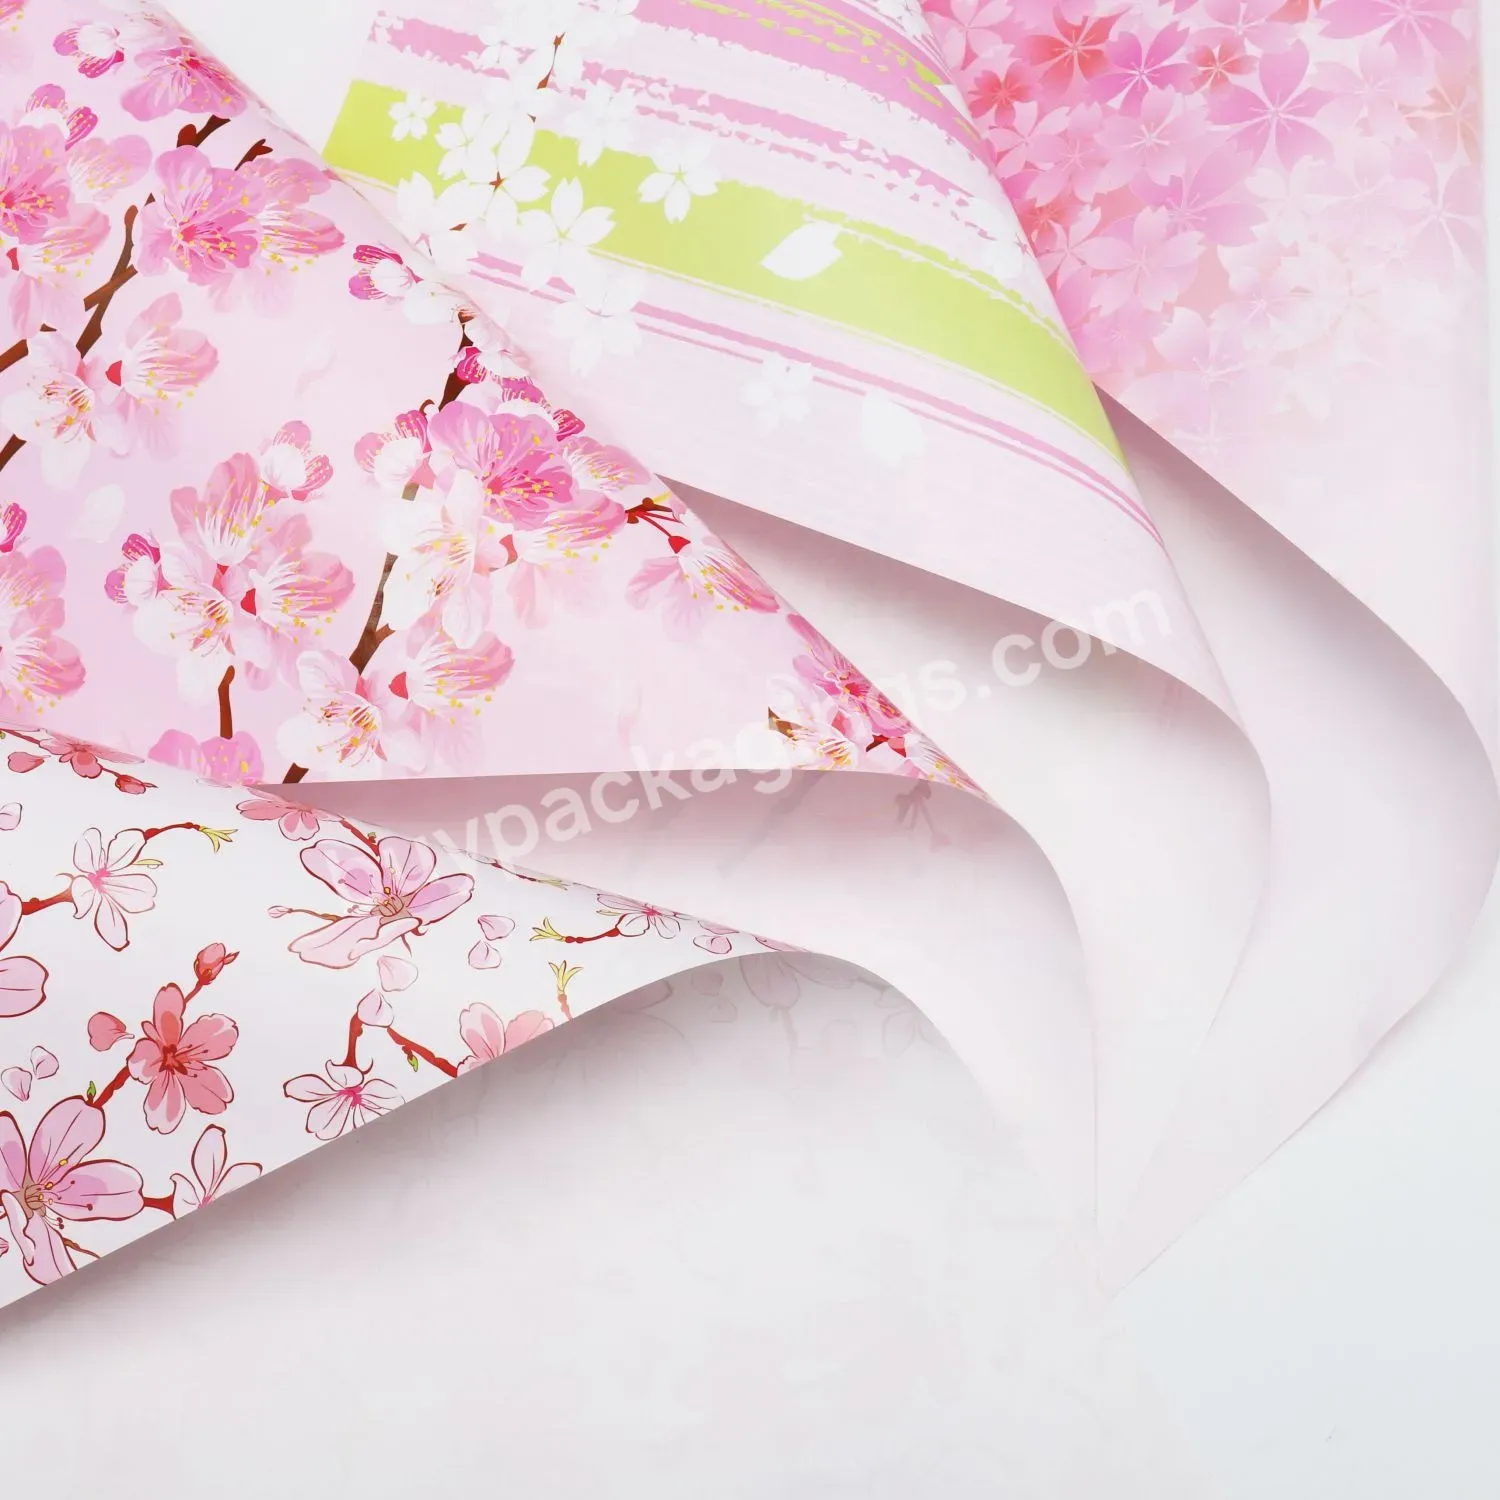 Sakura Design Pink Wrapping Paper For Mother's Day